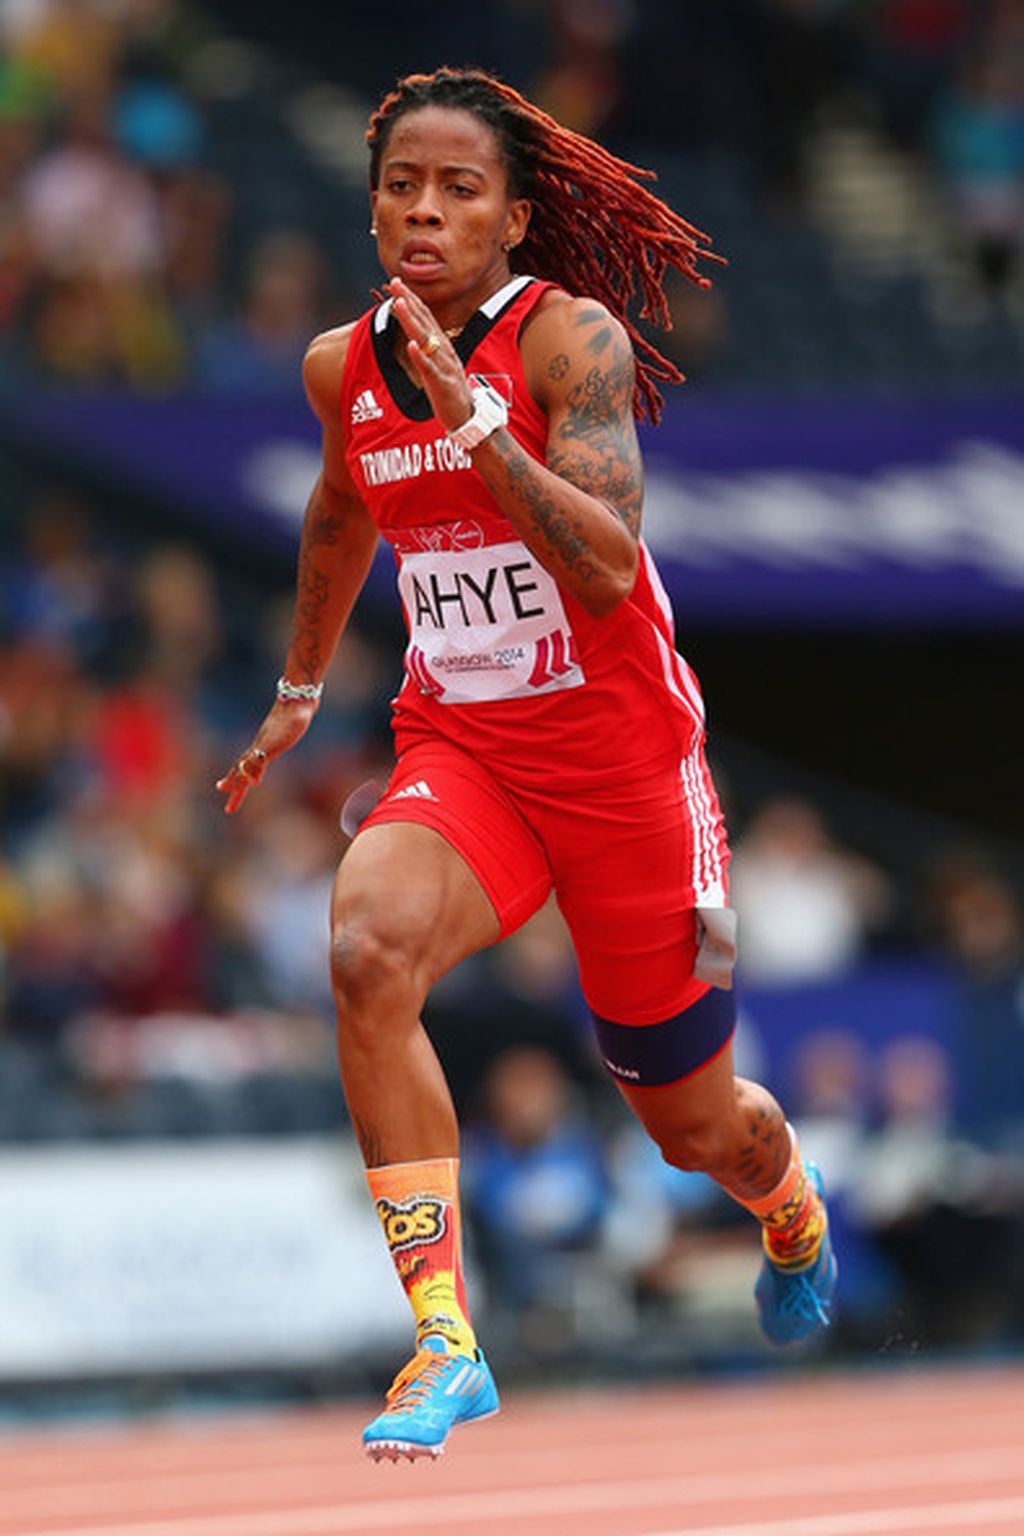 Gold for Ahye in England